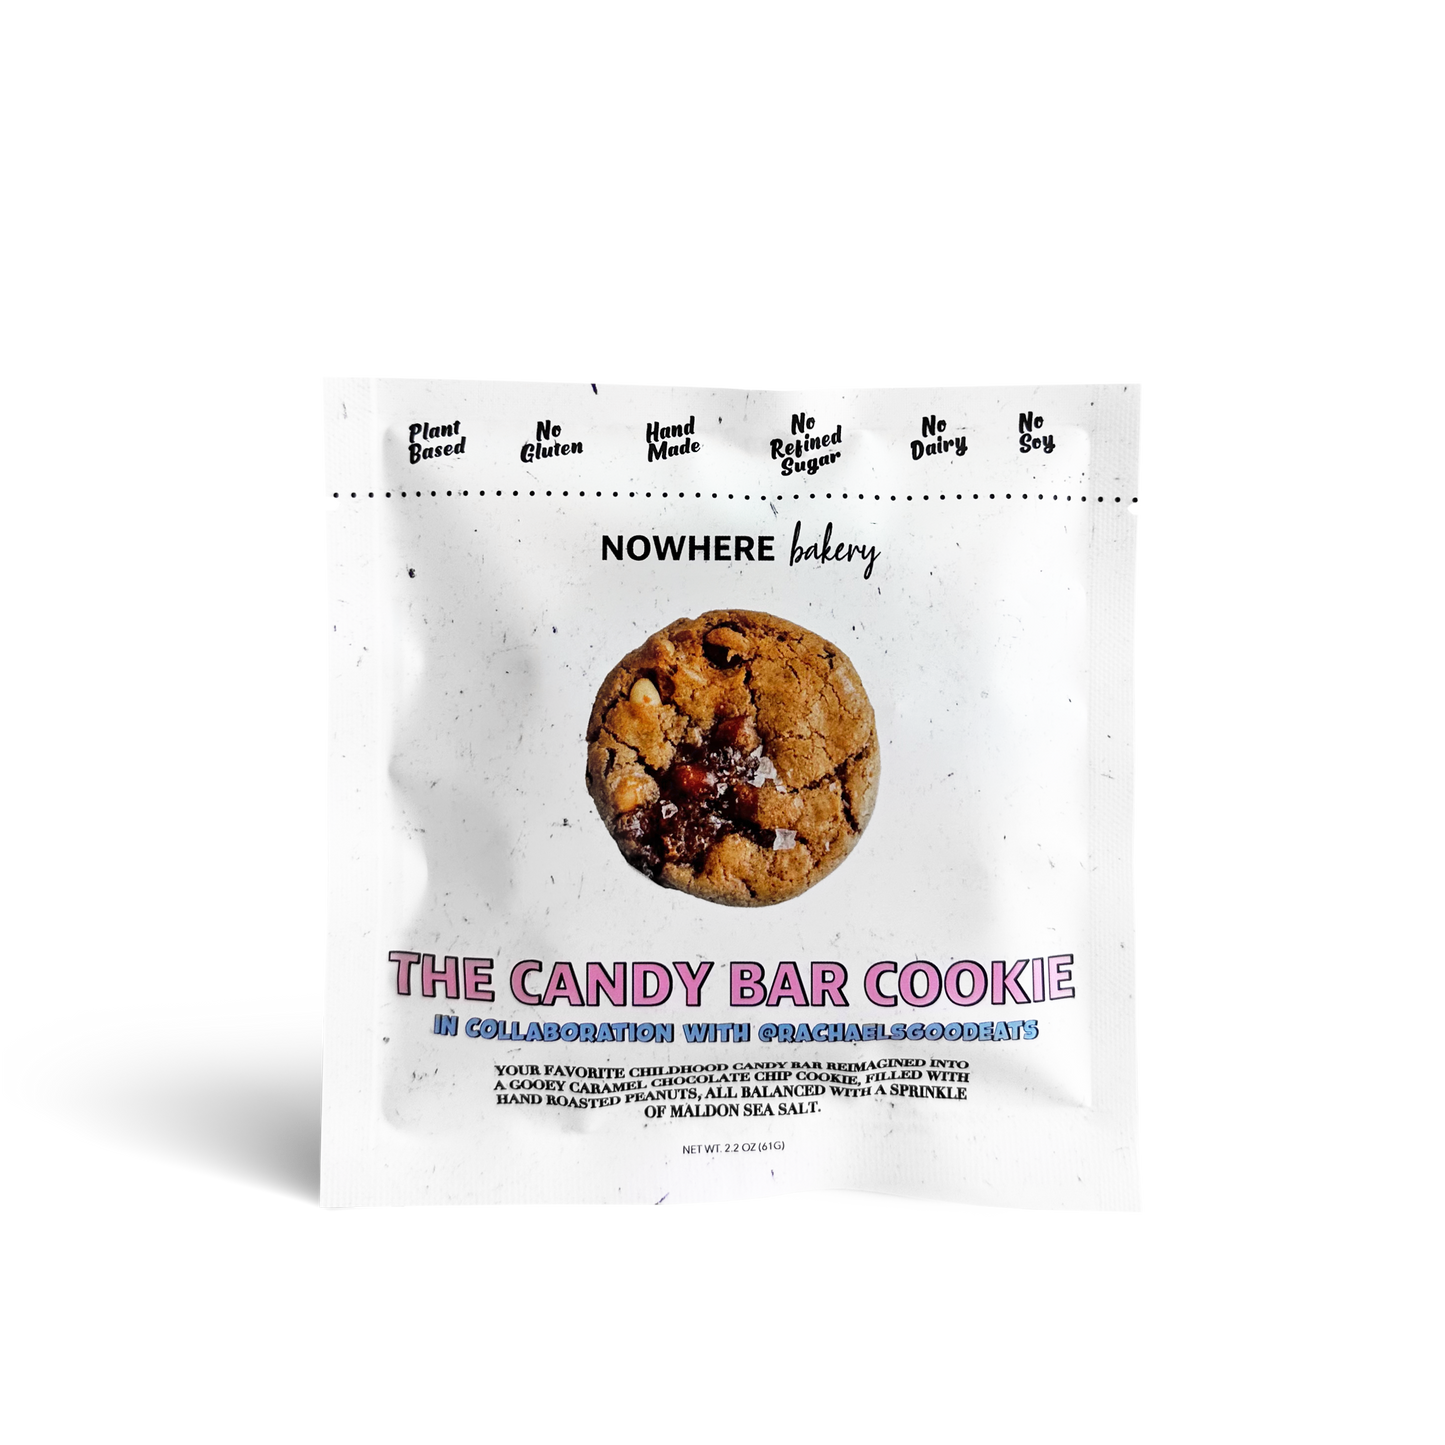 @rachaelsgoodeats Candy Bar Cookie by Nowhere Bakery. Packaging sho